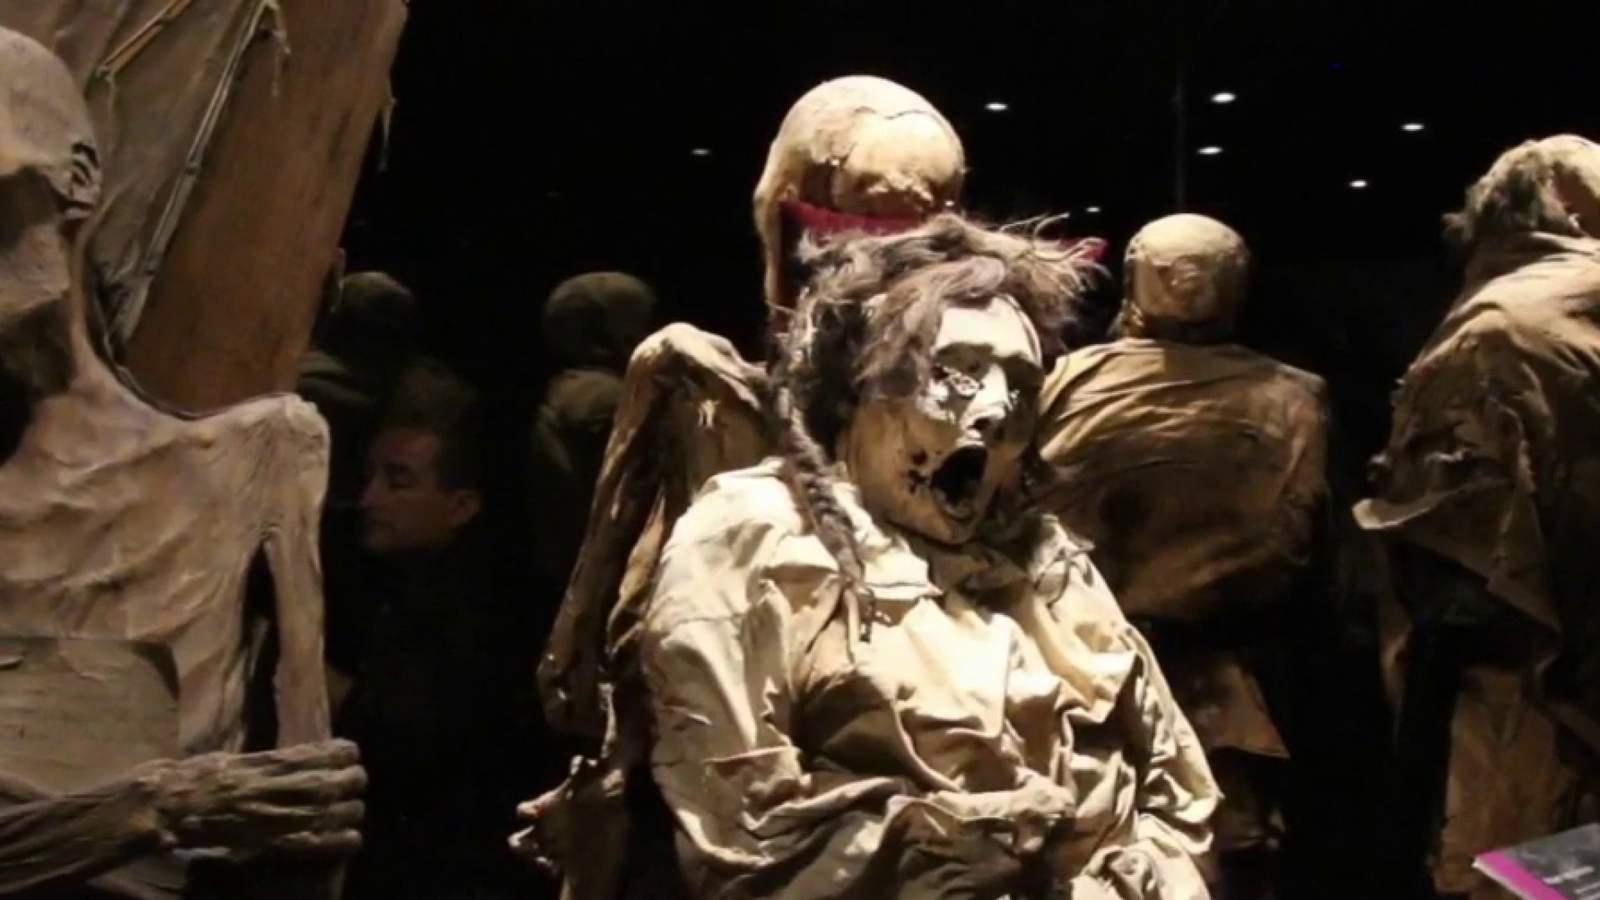 Origins of Mexico’s mysterious mummy museum and Day of the Dead connection